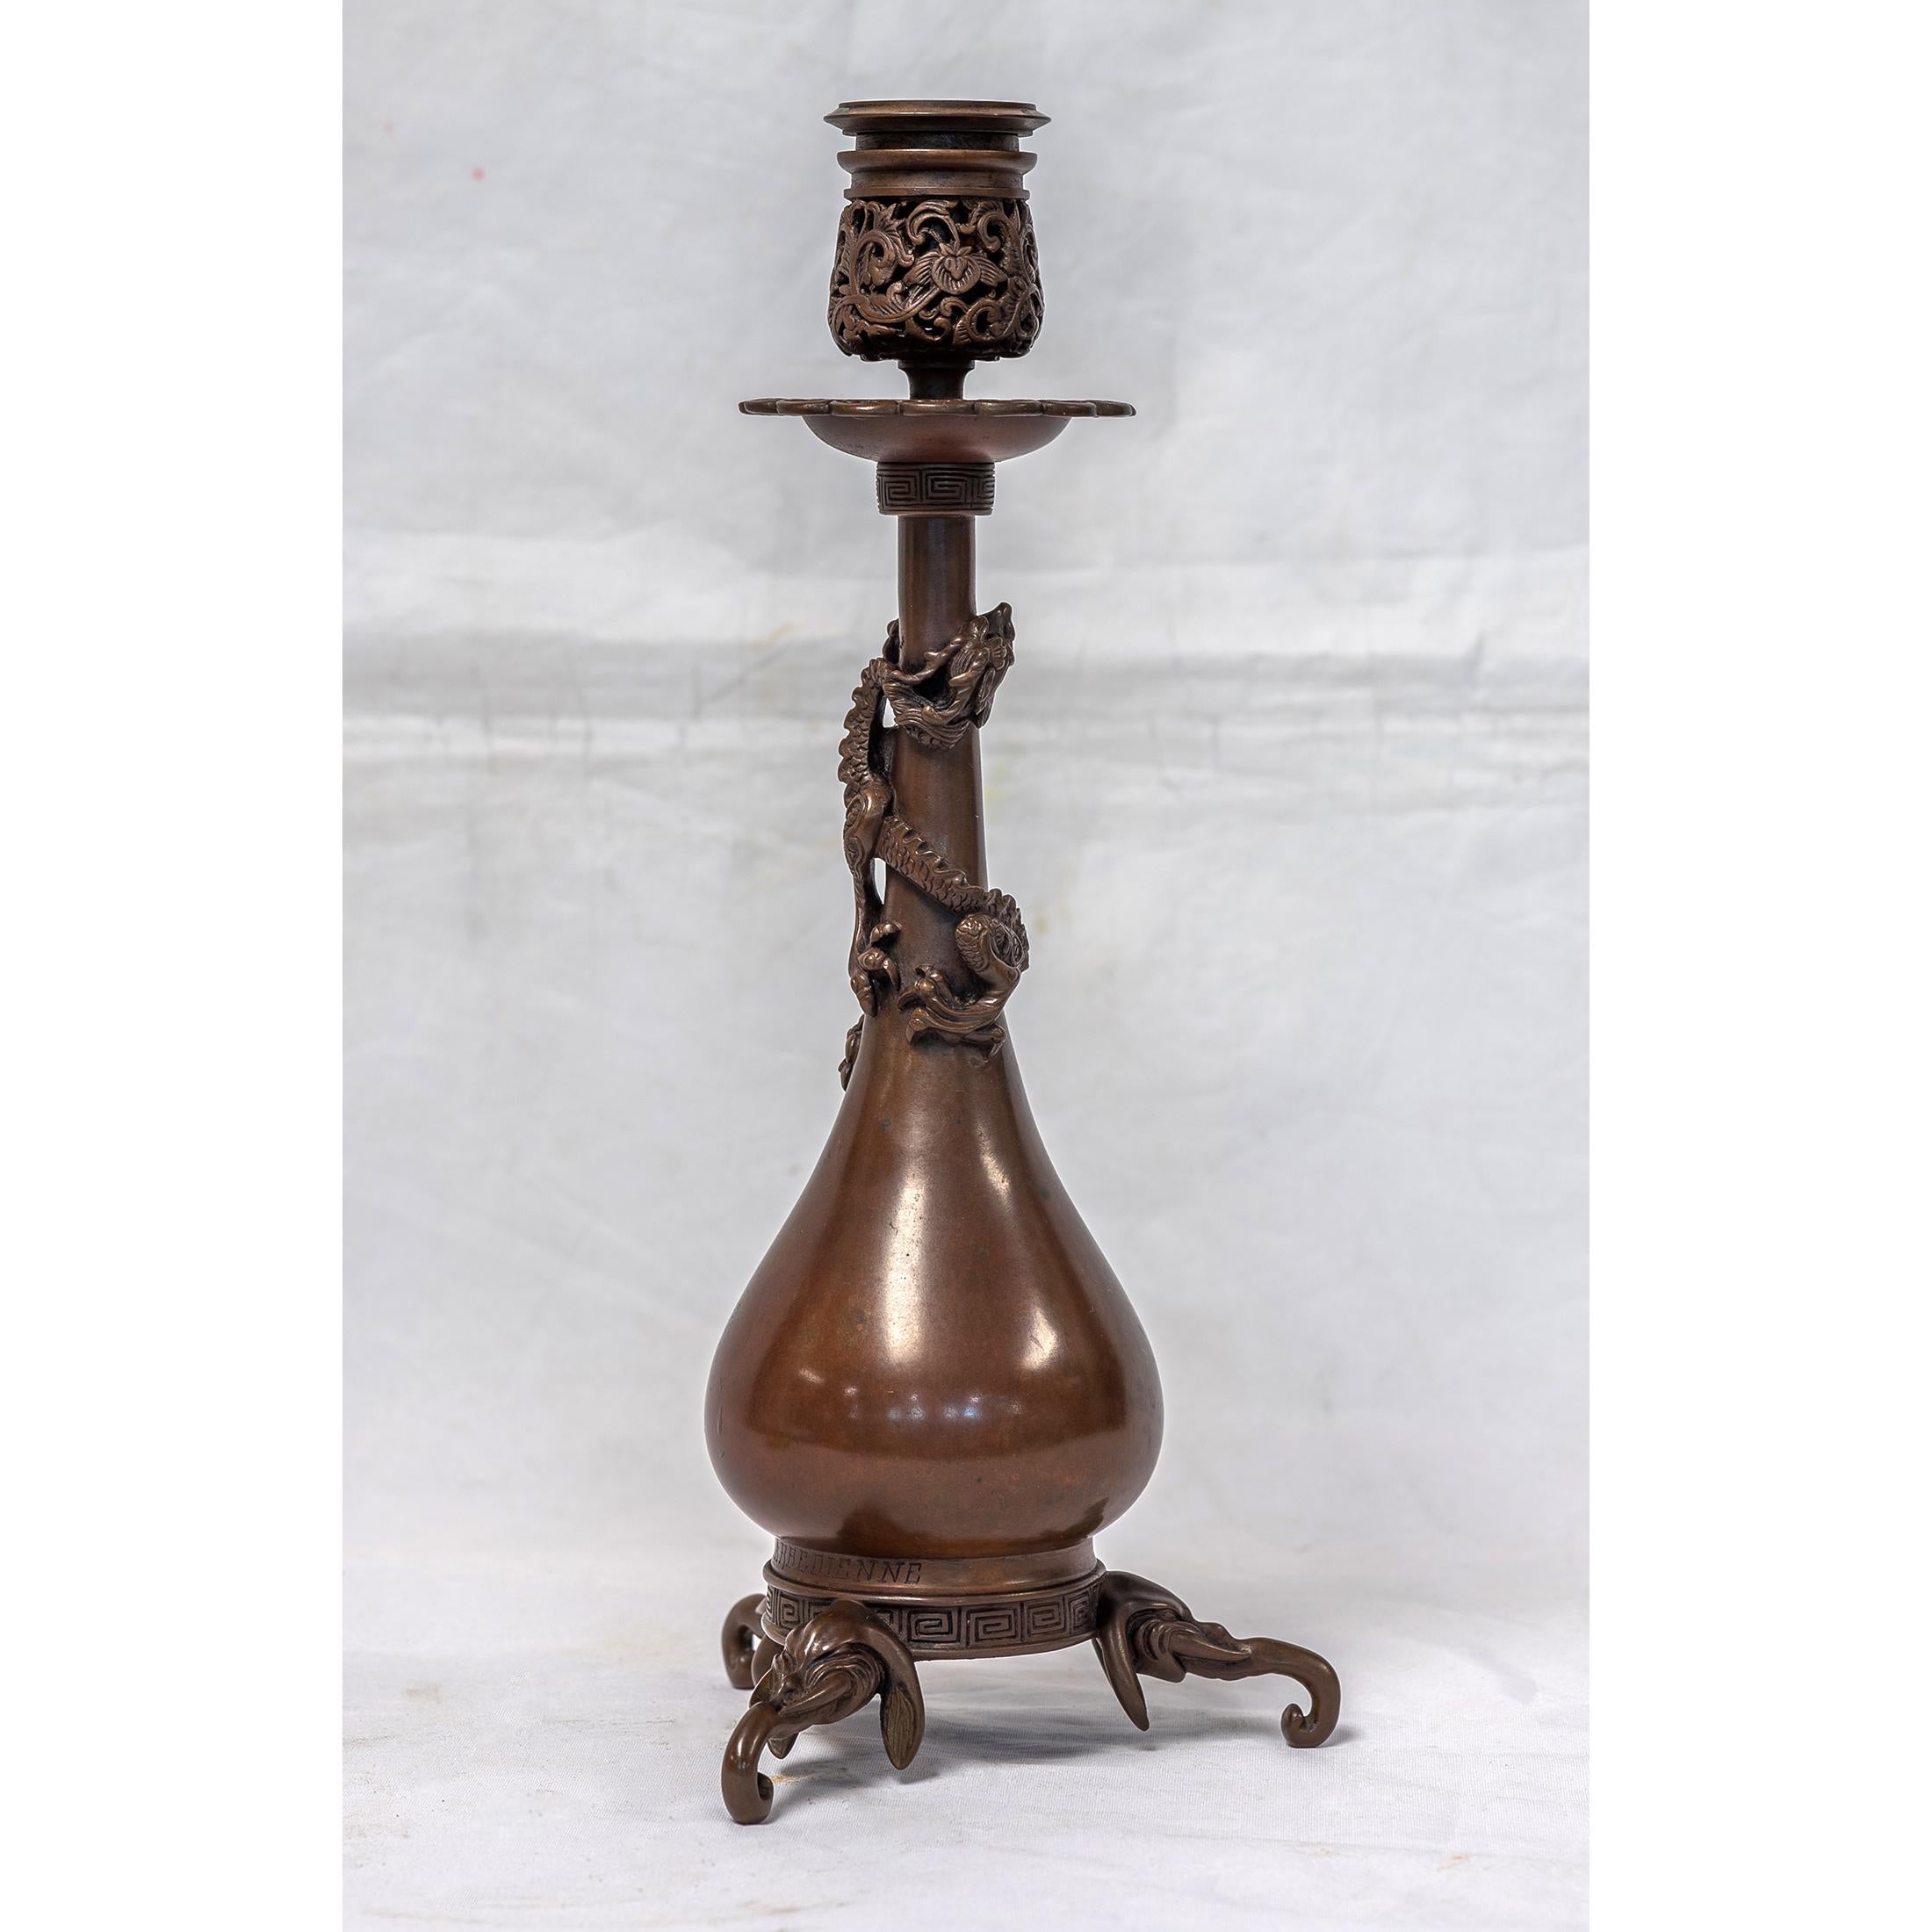 Based on a design by Edouard Lievre. Signed F. BARBEDIENNE

Maker: Ferdinand Barbedienne (1810-1892)
Date: Circa 1870
Origin: French
Dimension: 11 inches tall.